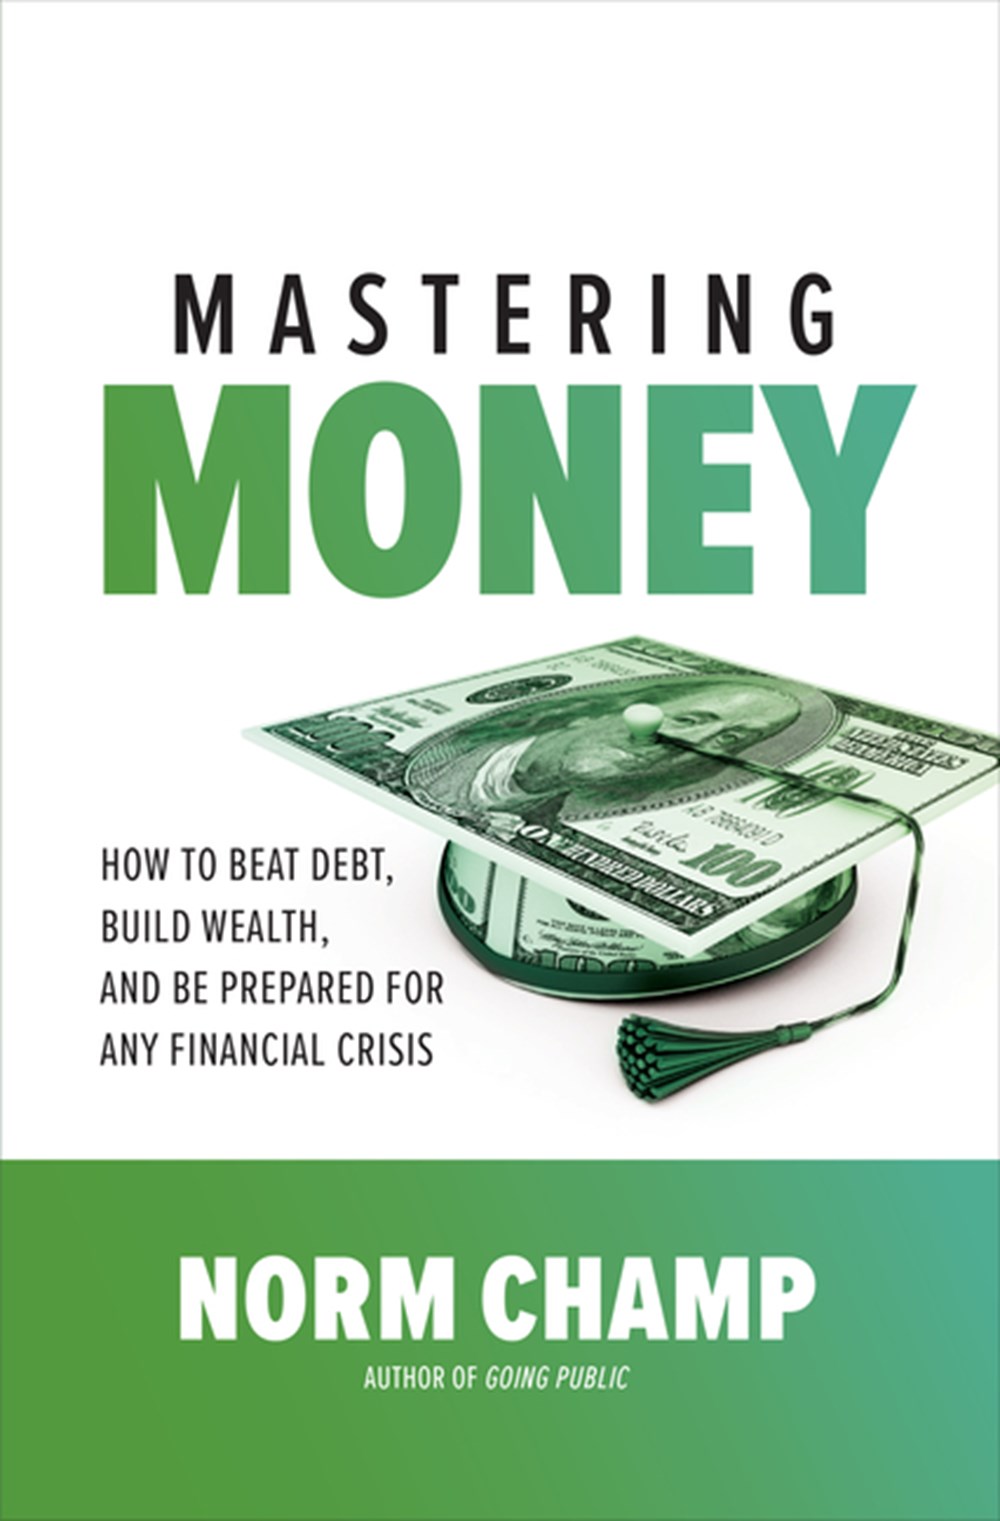 Mastering Money How to Beat Debt, Build Wealth, and Be Prepared for Any Financial Crisis